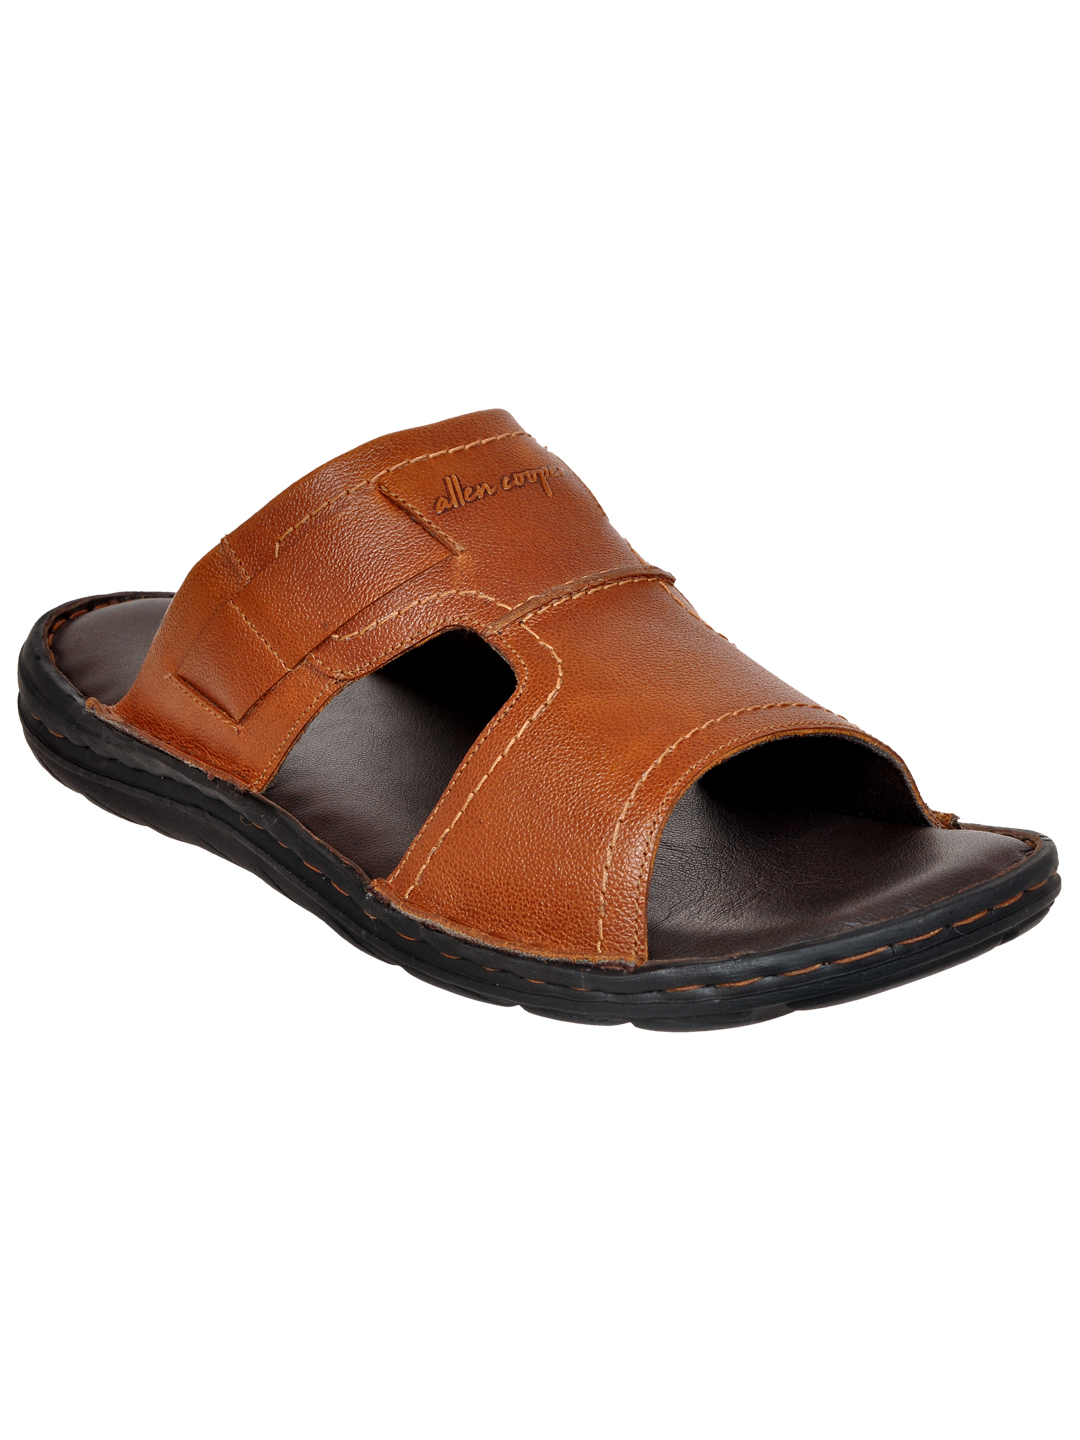 Buy Best Round Toe Sandals From Top Brands Online In India